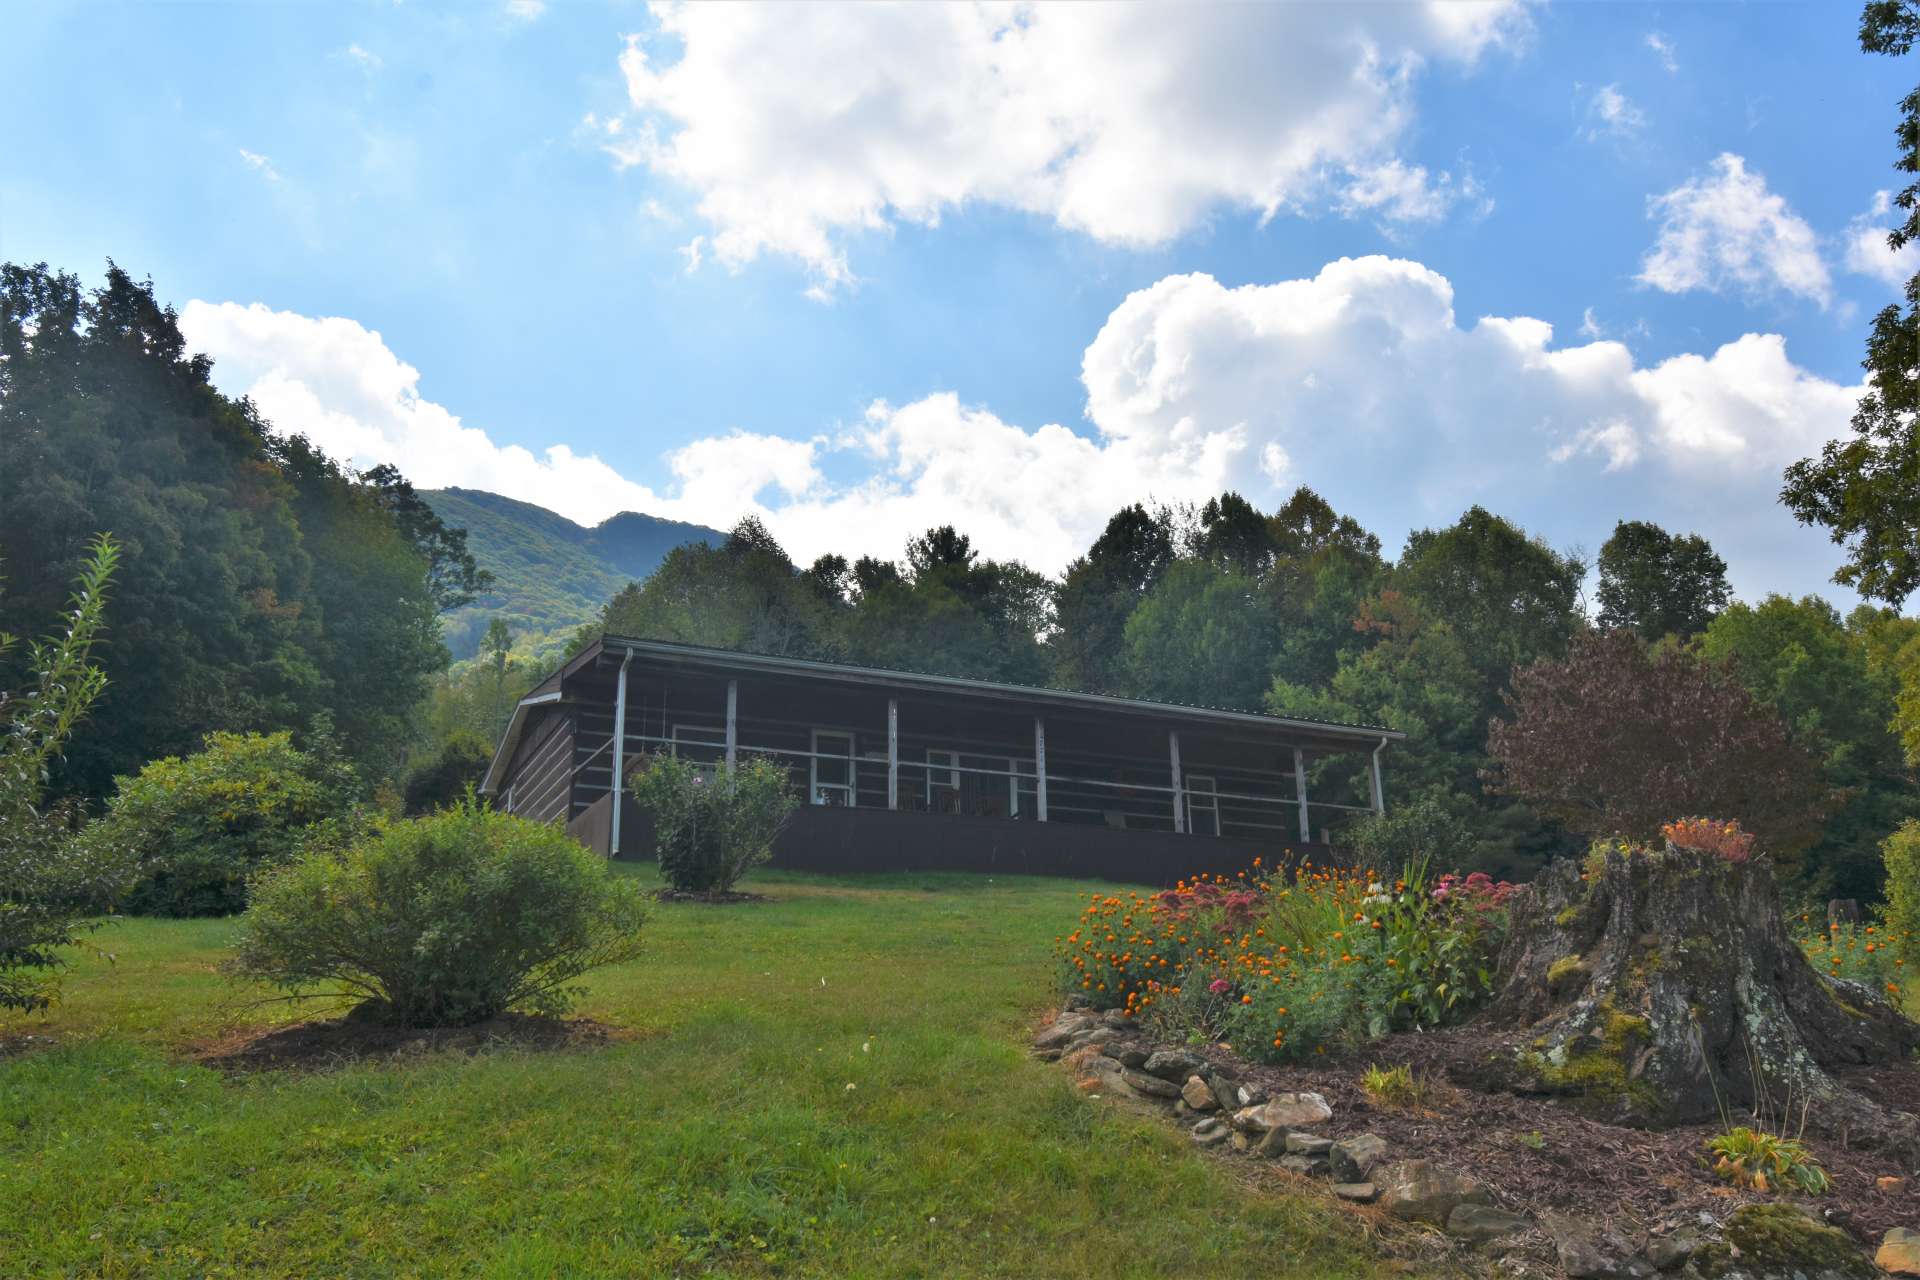 Offered at $171,000, this sweet country home on 10.35 acres is located off of Peak Road in the Creston area of Ashe County in the serene mountains of North Carolina.   Call for more information on listing G113 *UNDER CONTRACT!